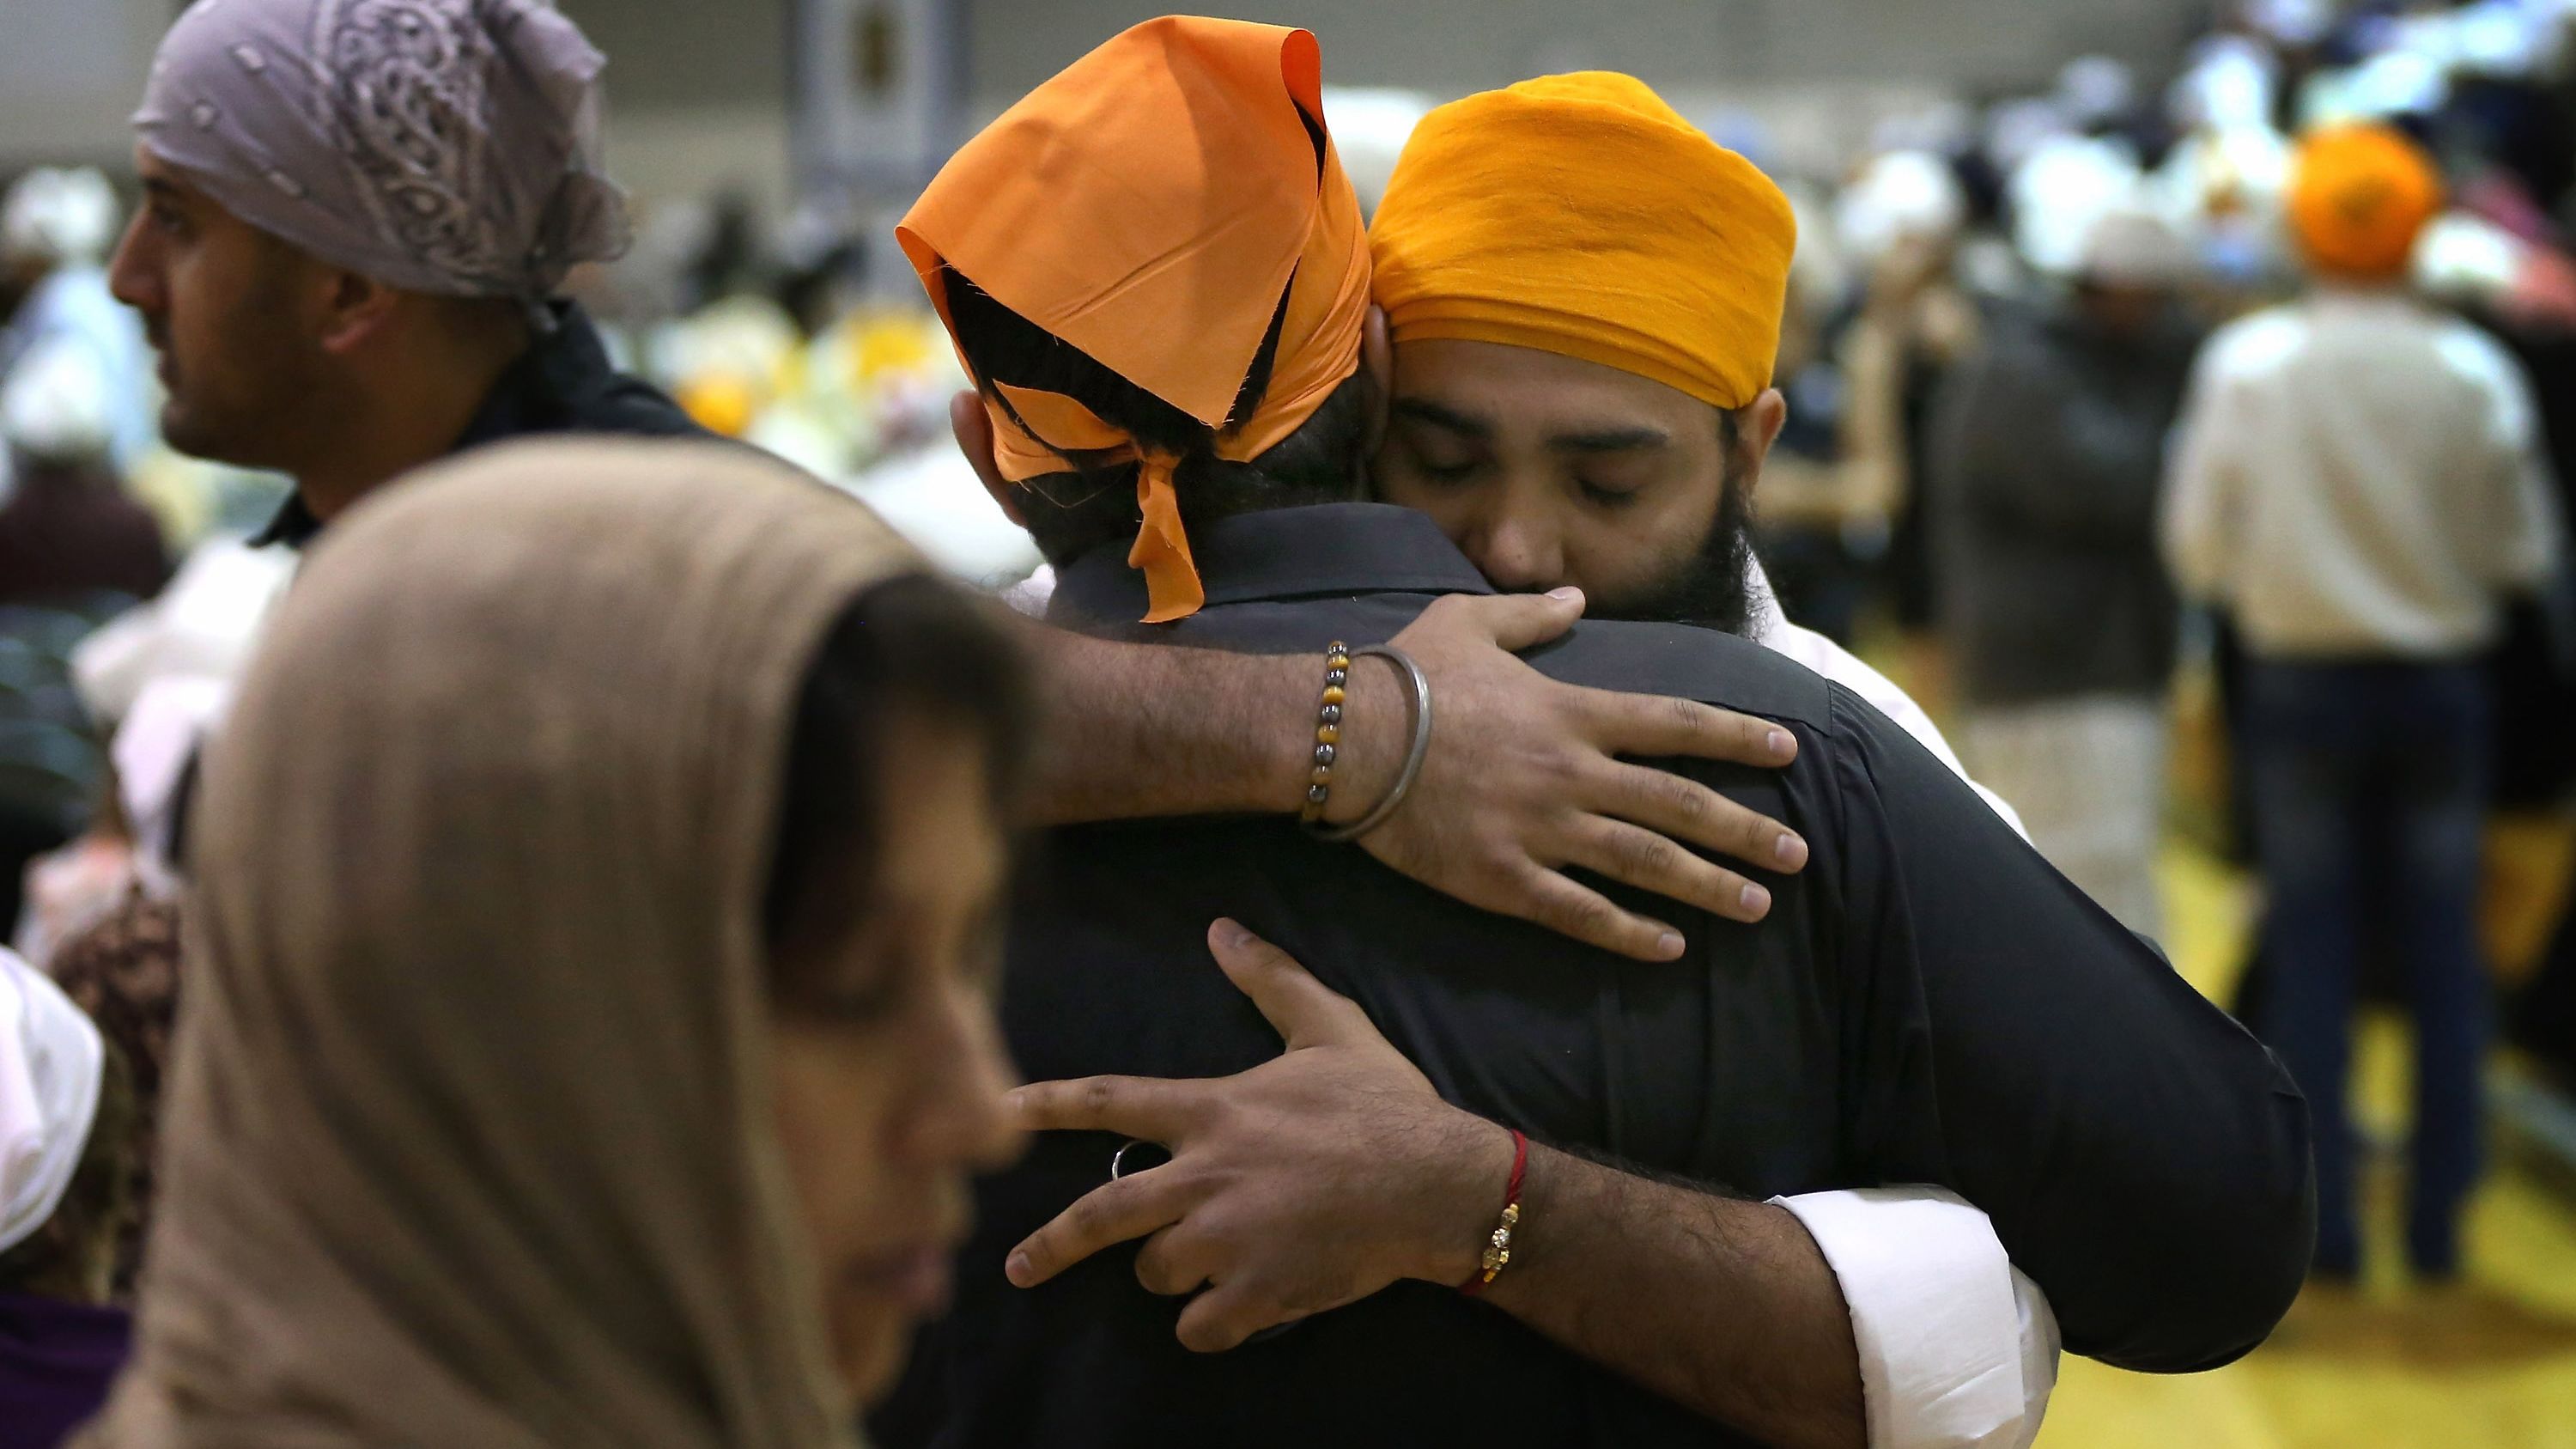 After 9/11, turbans made Sikhs targets | CNN